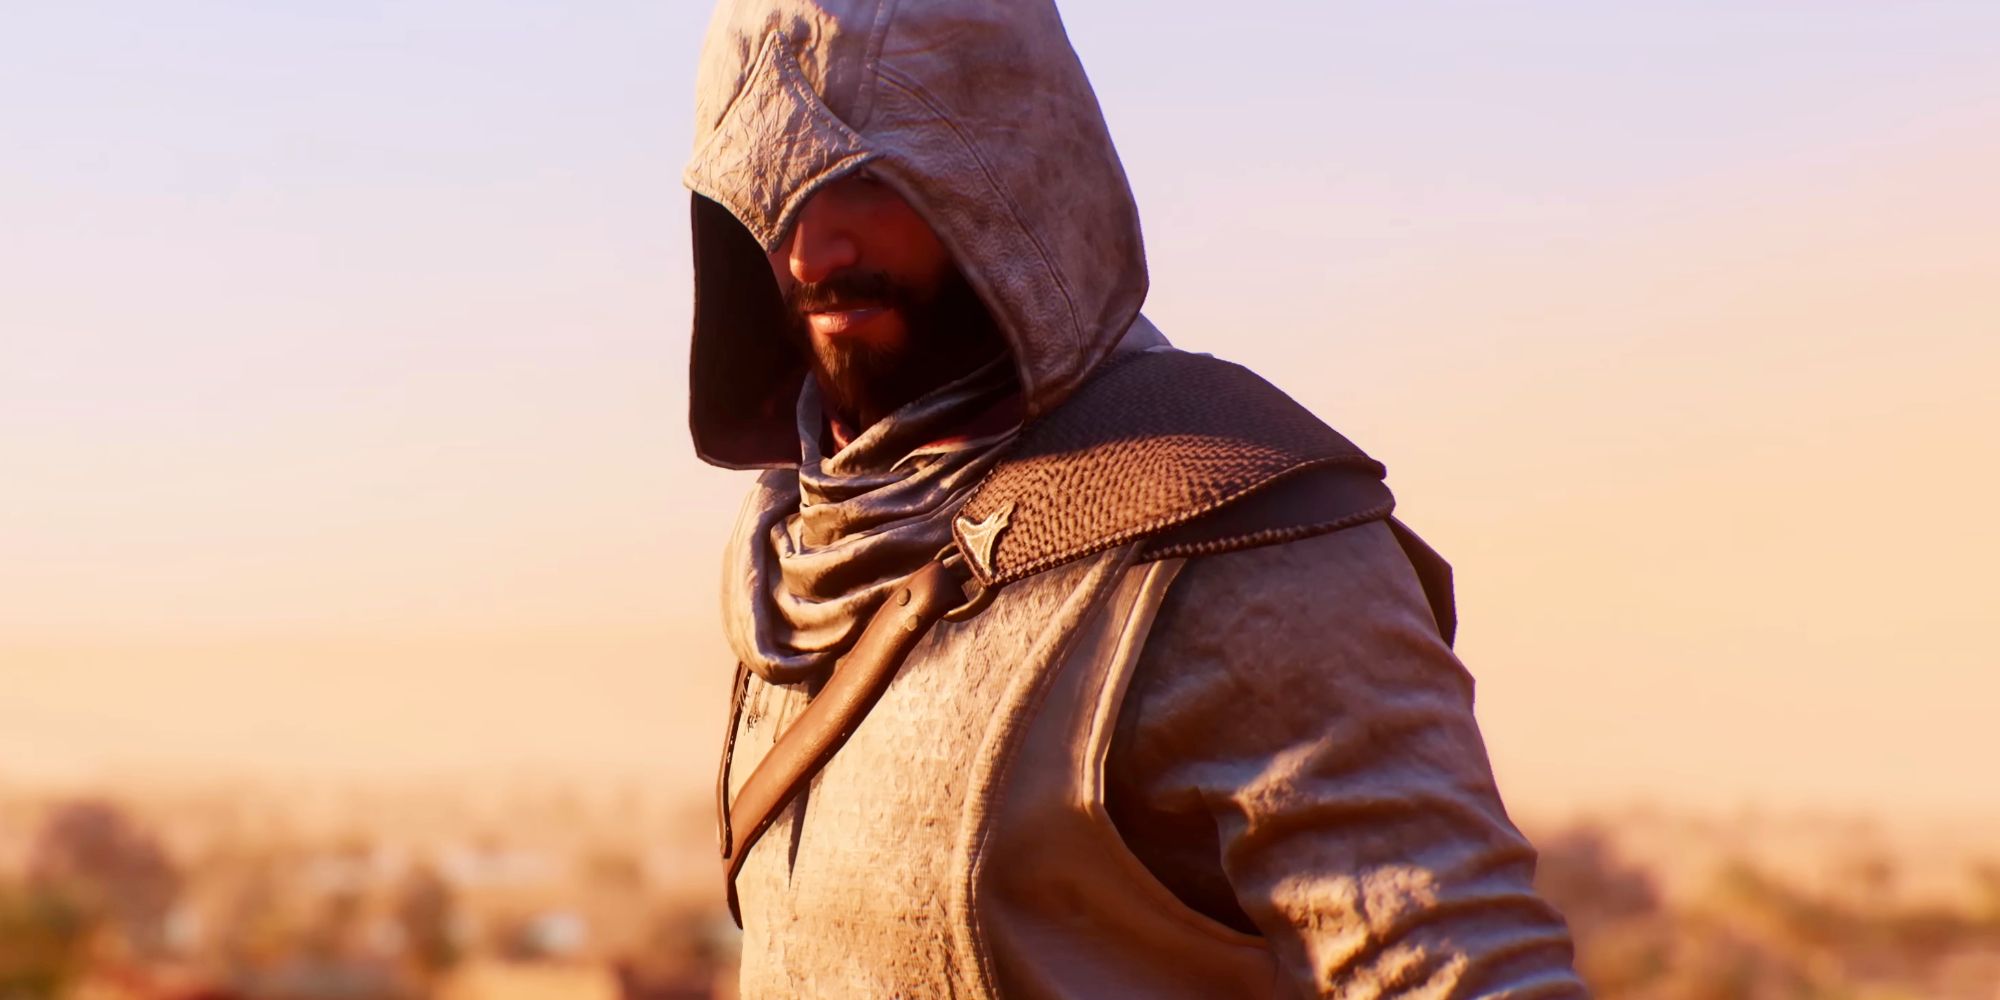 Basim in Assassin's Creed Mirage, with a pointed hood pulled down over his eyes. His robes are off white, and he's wearing a leather shoulder guard which has a strap going across his chest.